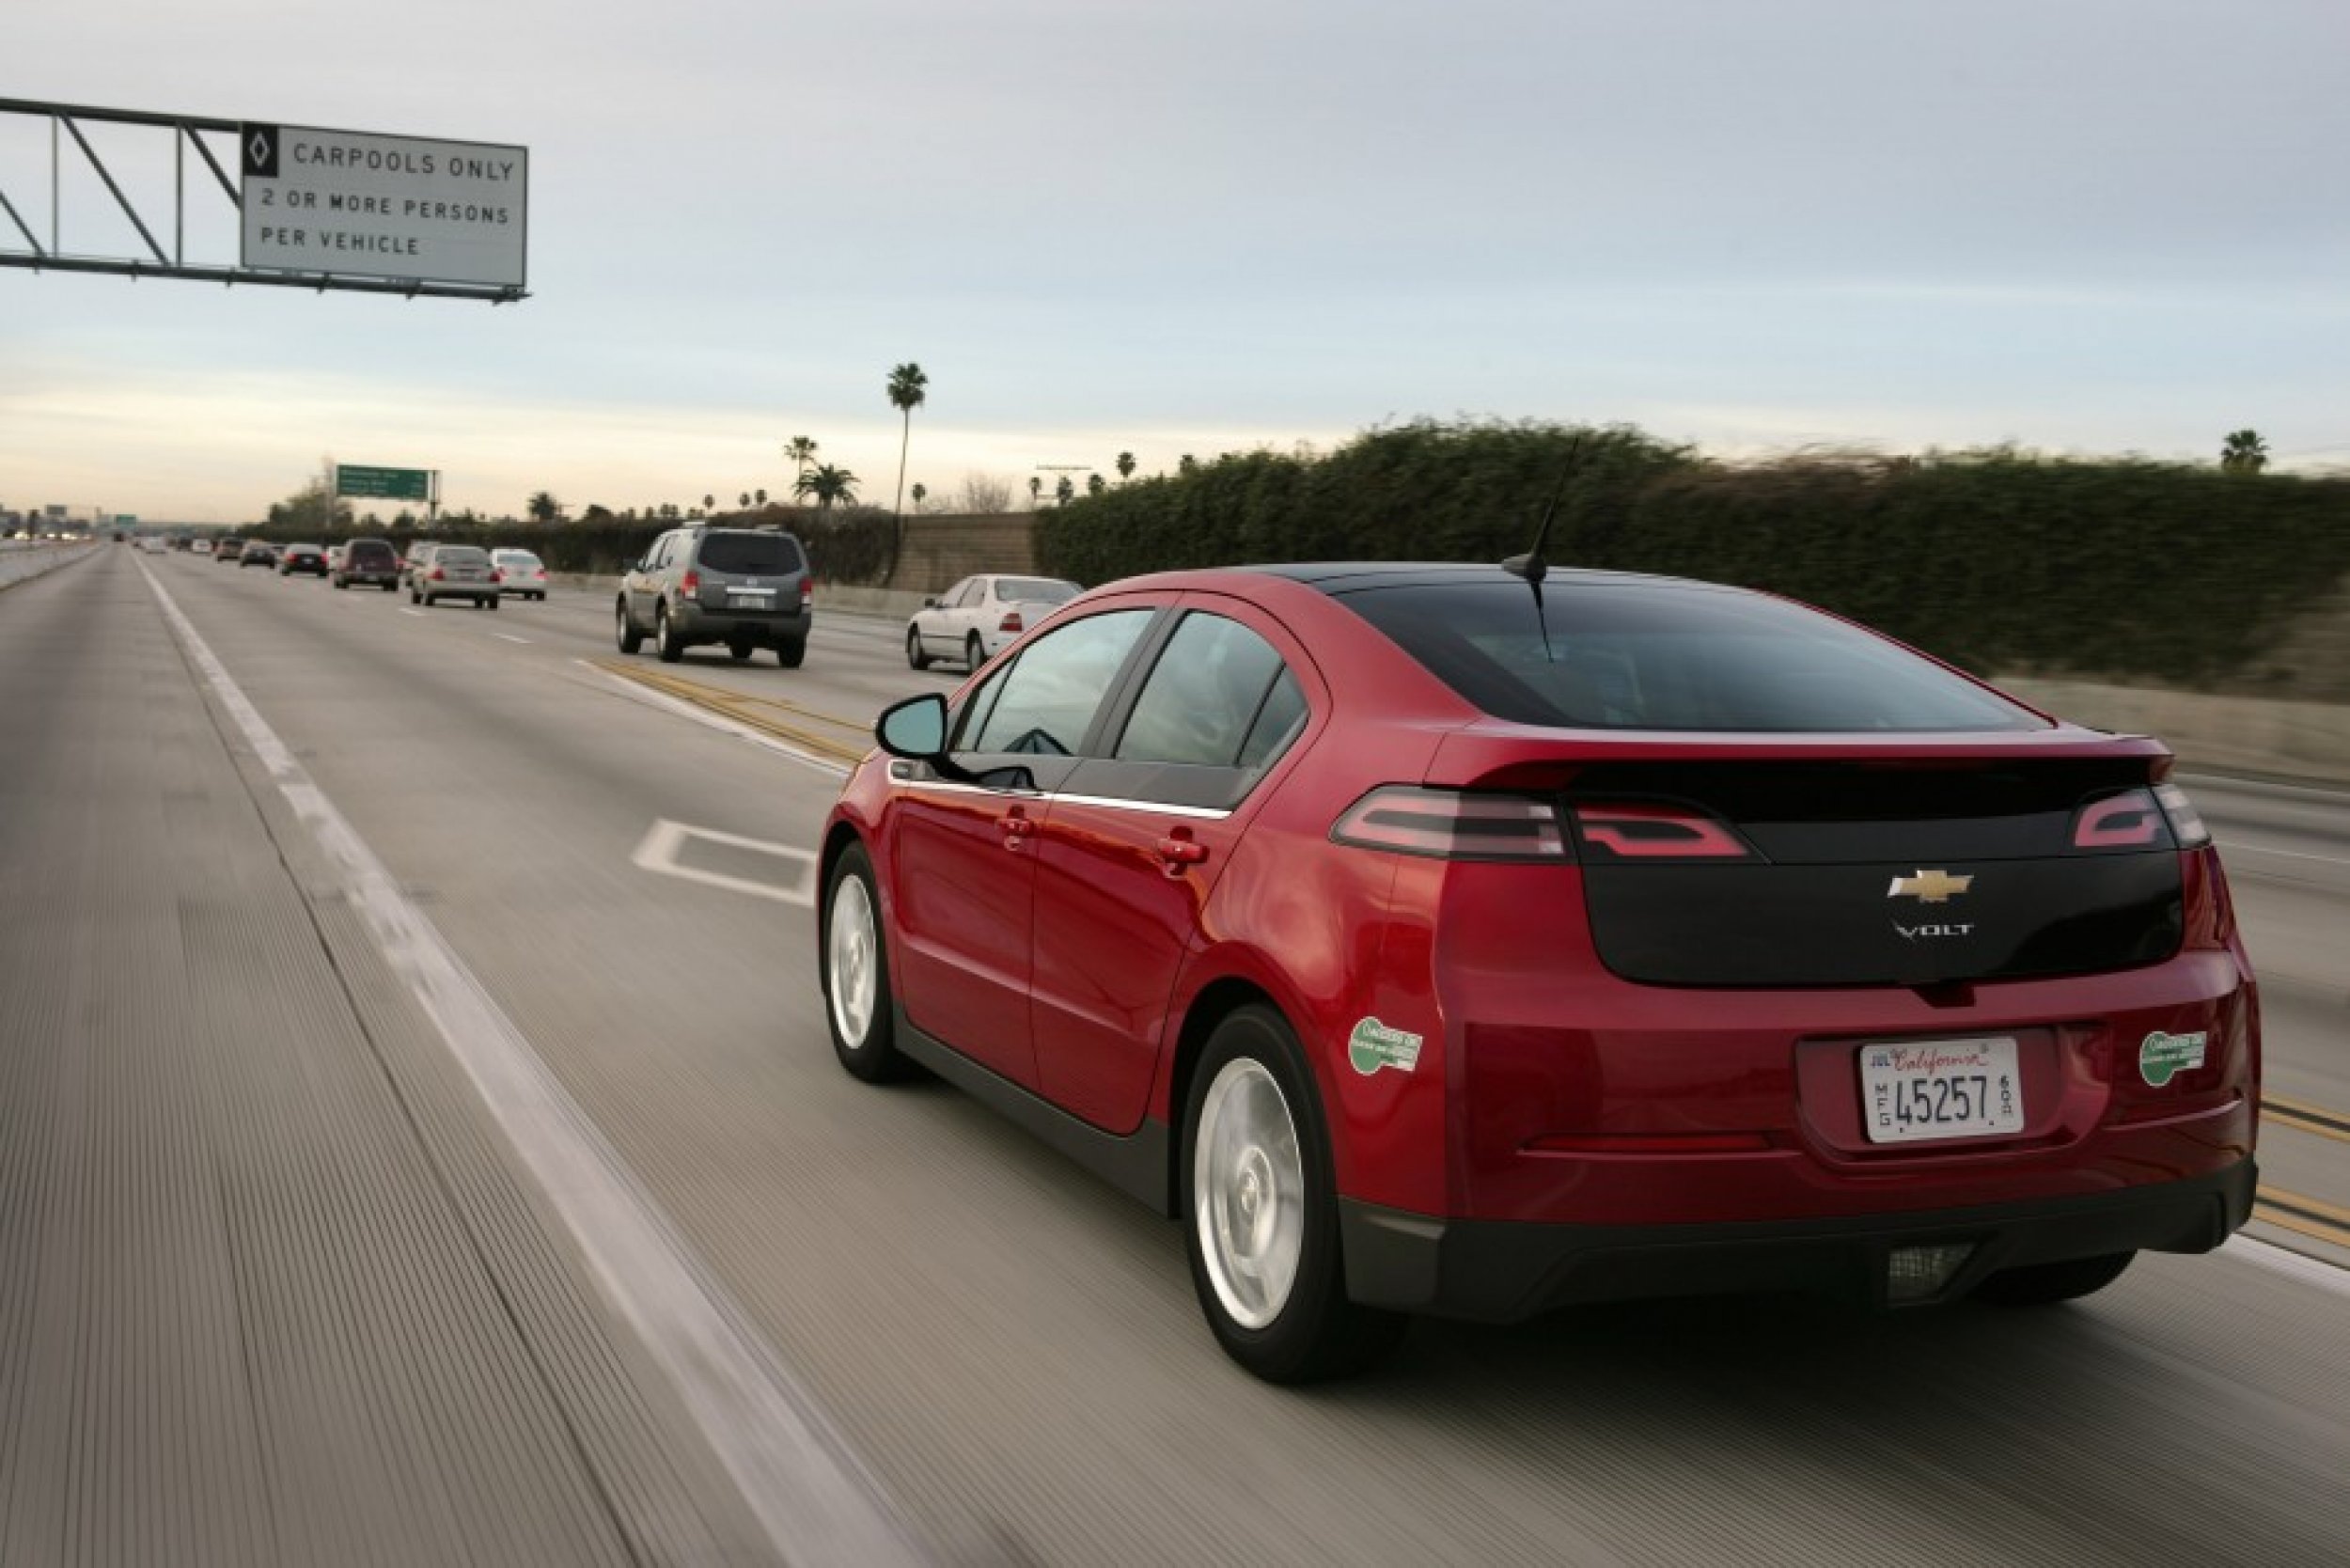 HOVLane Access Drives Electric Car Sales In California